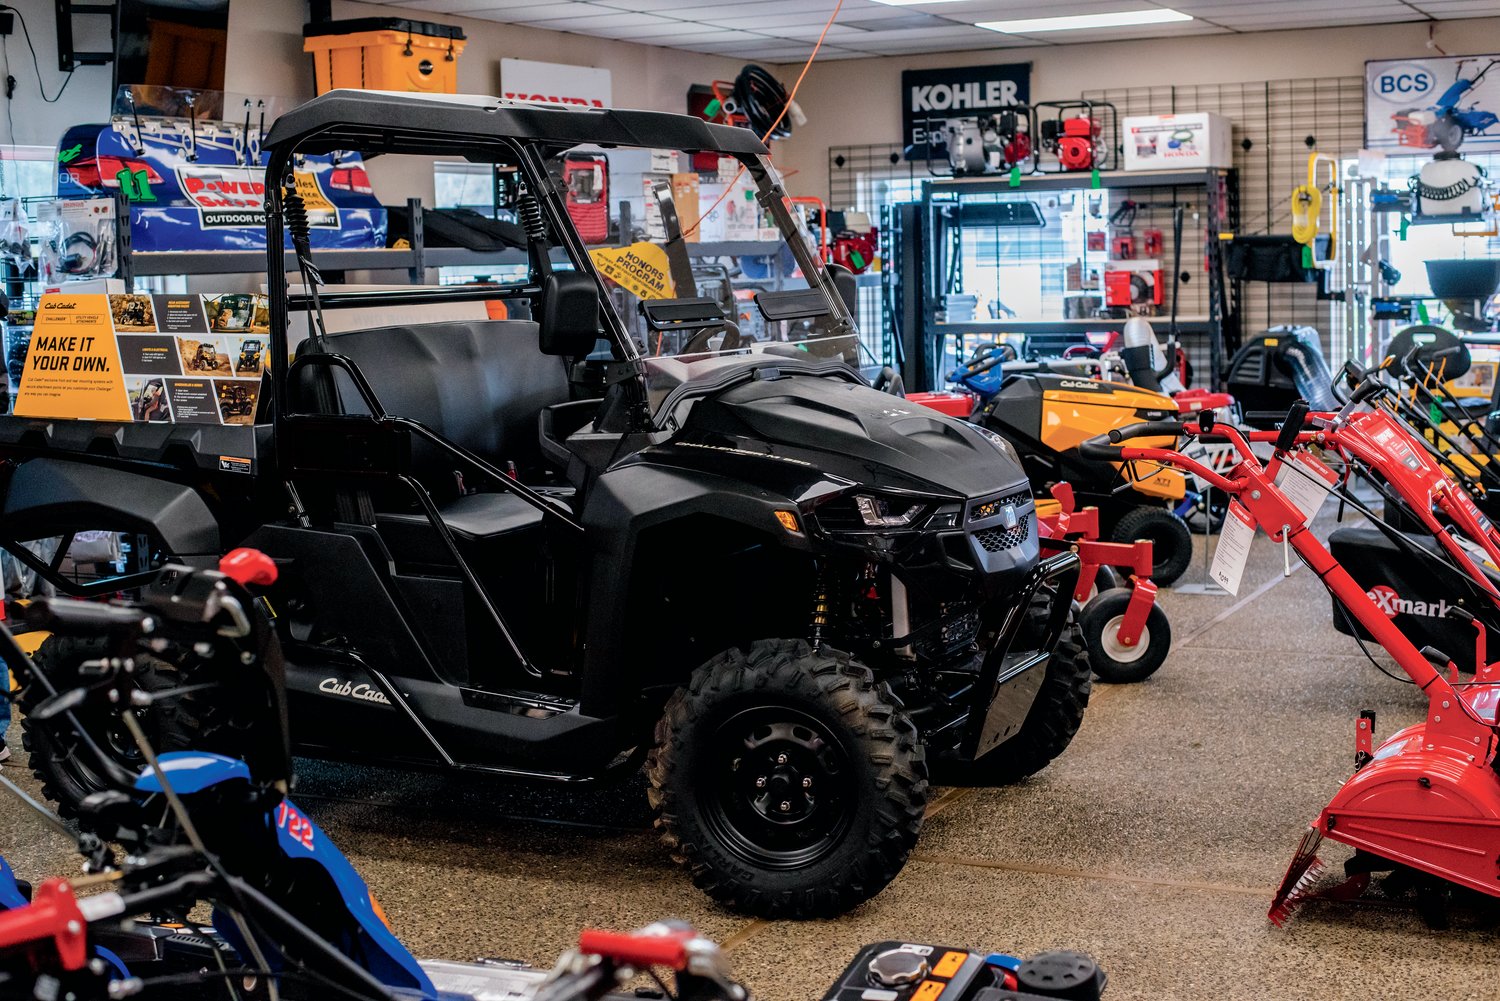 Brands including Cub Cadet, Honda, Kohler and Exmark are seen on display inside the Power Shop in Centralia.